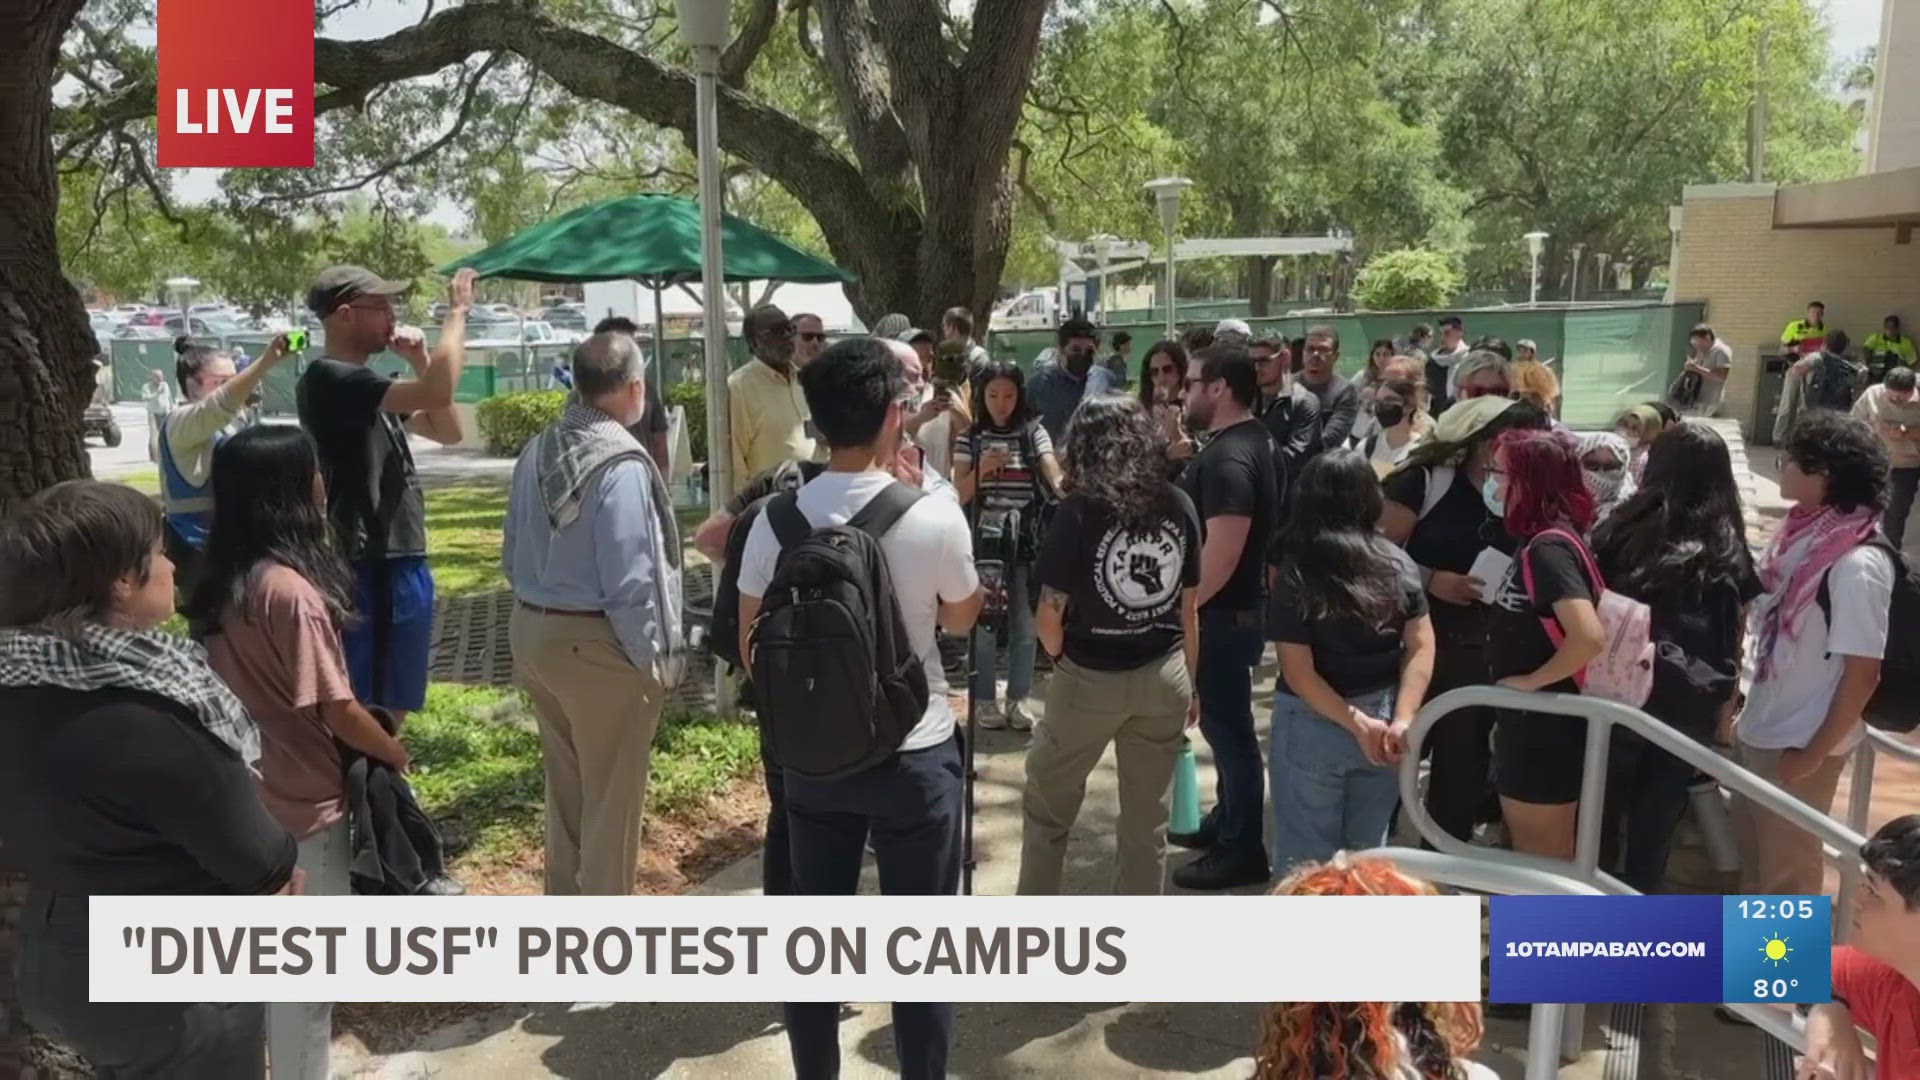 Demonstrators are demanding USF divest from companies that support Israel amid the ongoing Israel-Hamas war, where thousands of Palestinians have died.